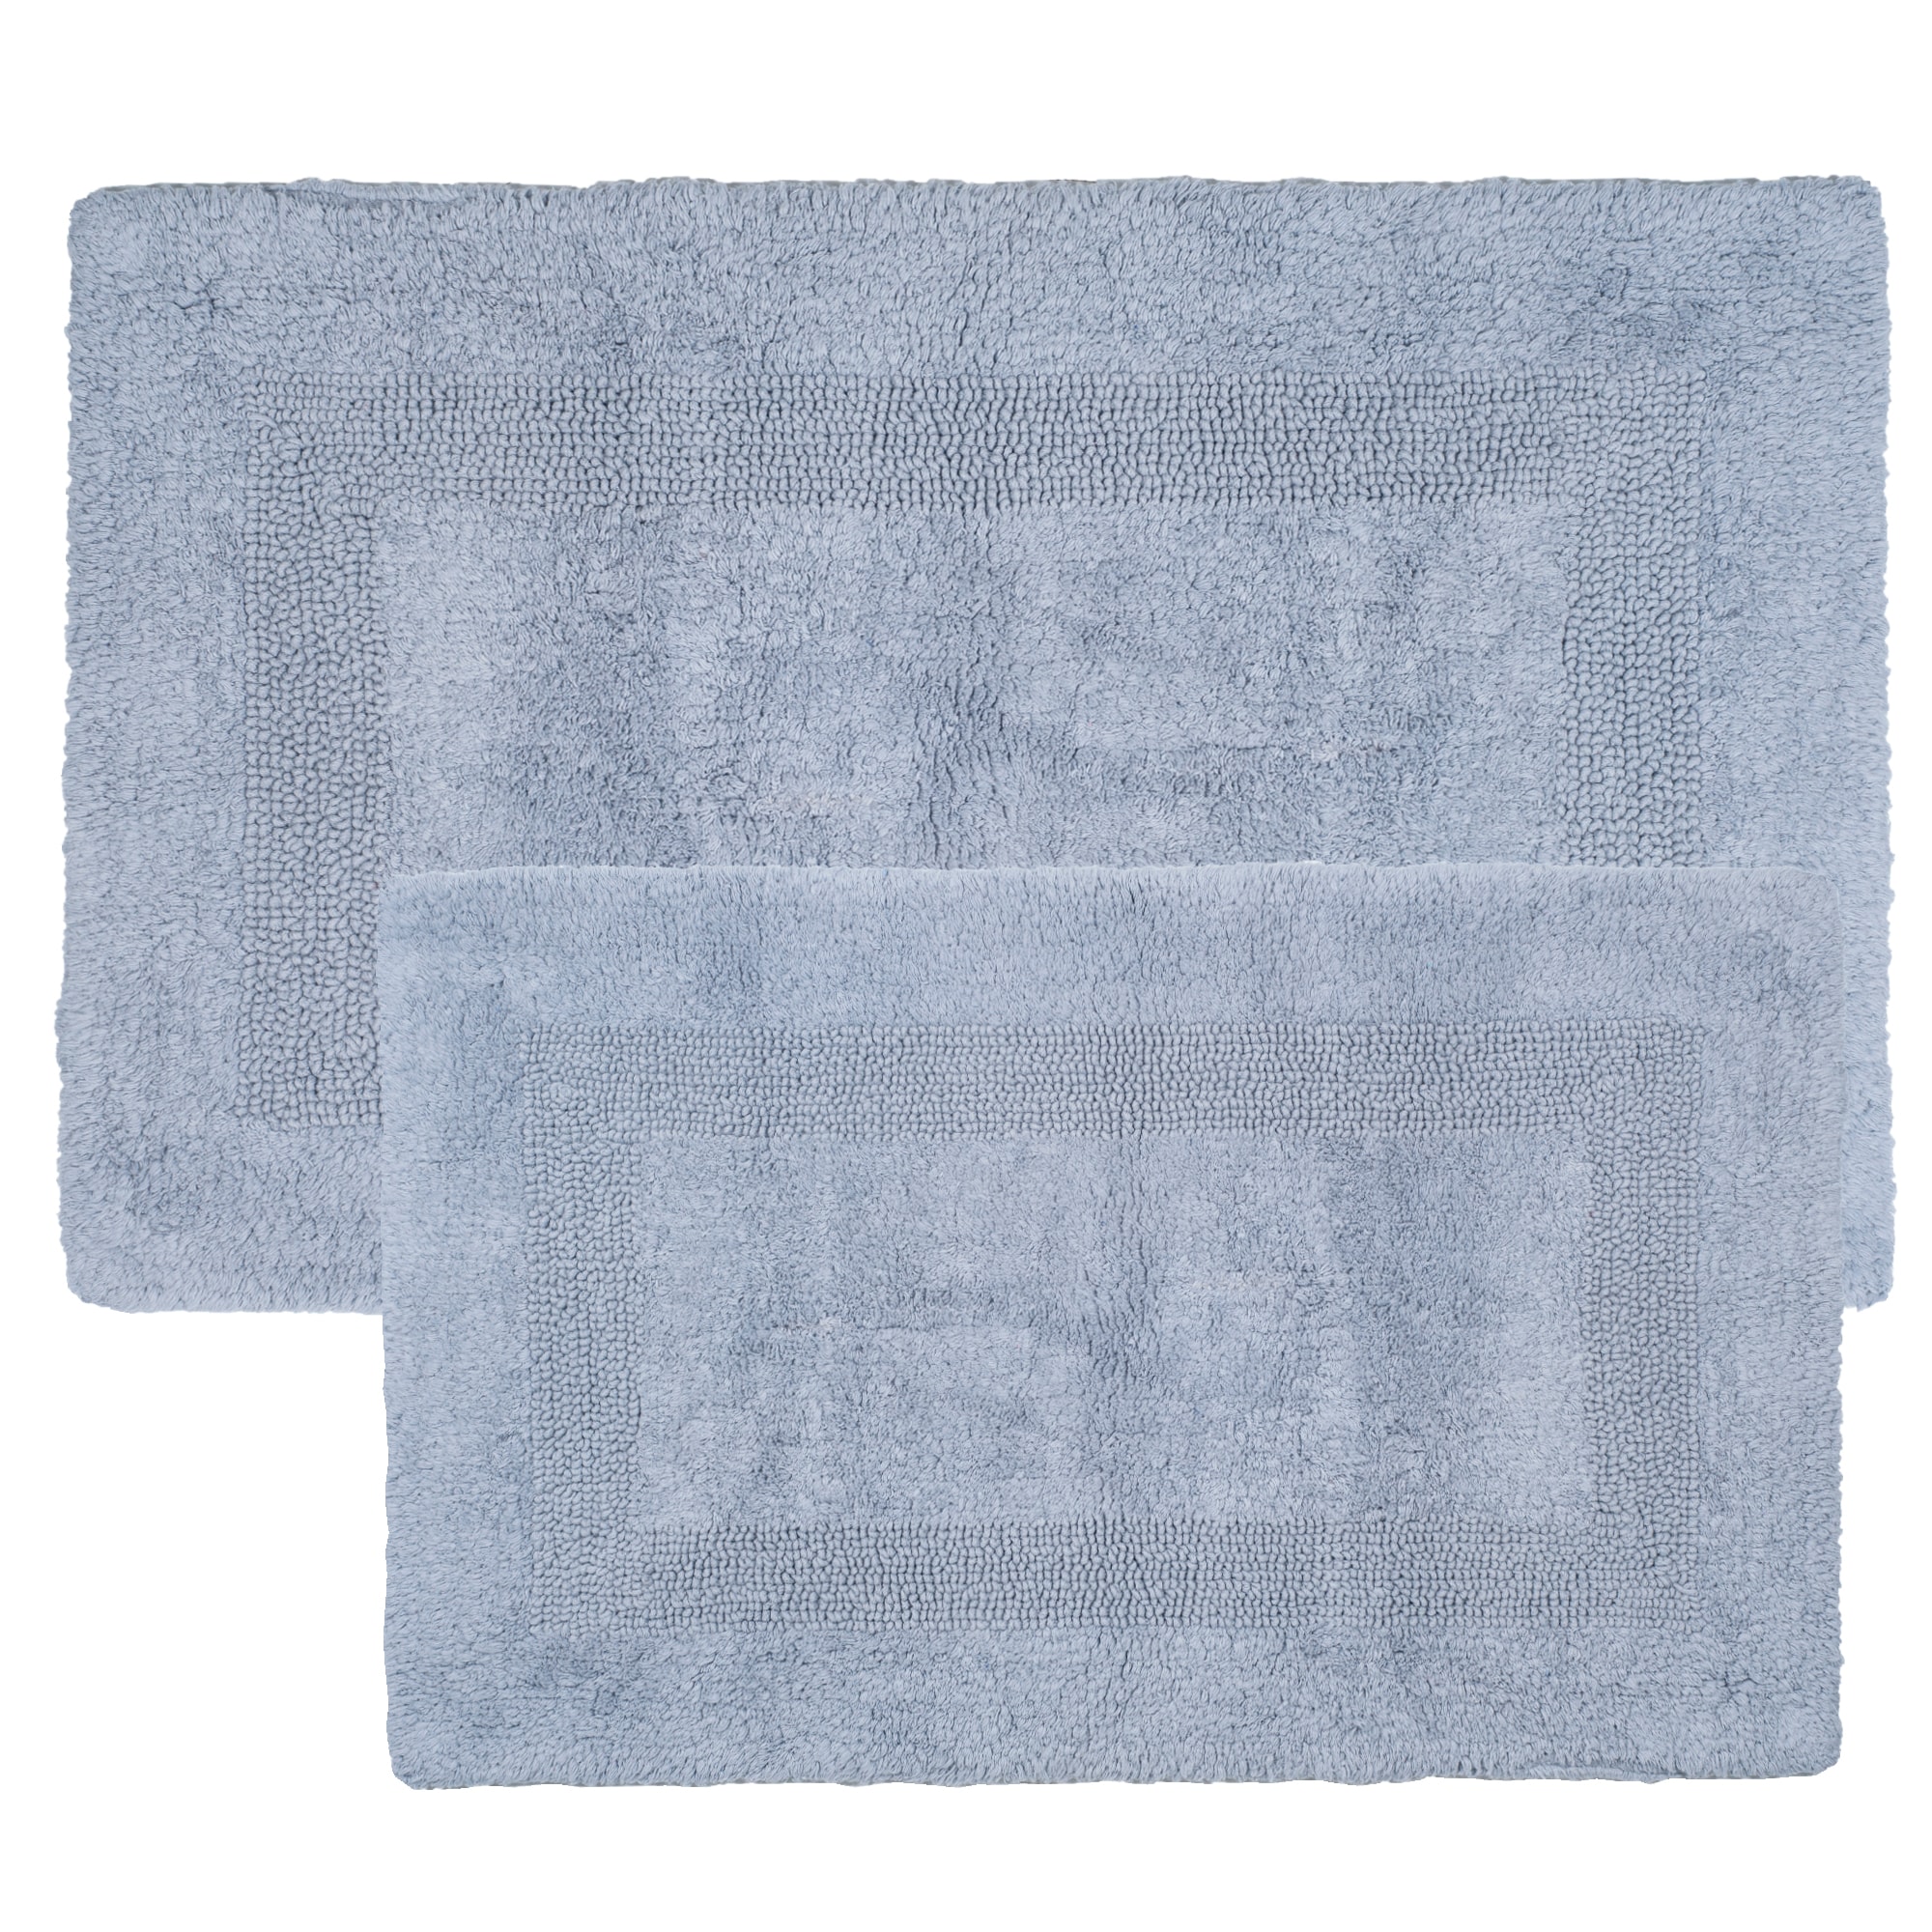 Hastings Home 2-Piece Bathroom Rug Set, White 22-in x 35-in White Cotton Bath  Rug in the Bathroom Rugs & Mats department at